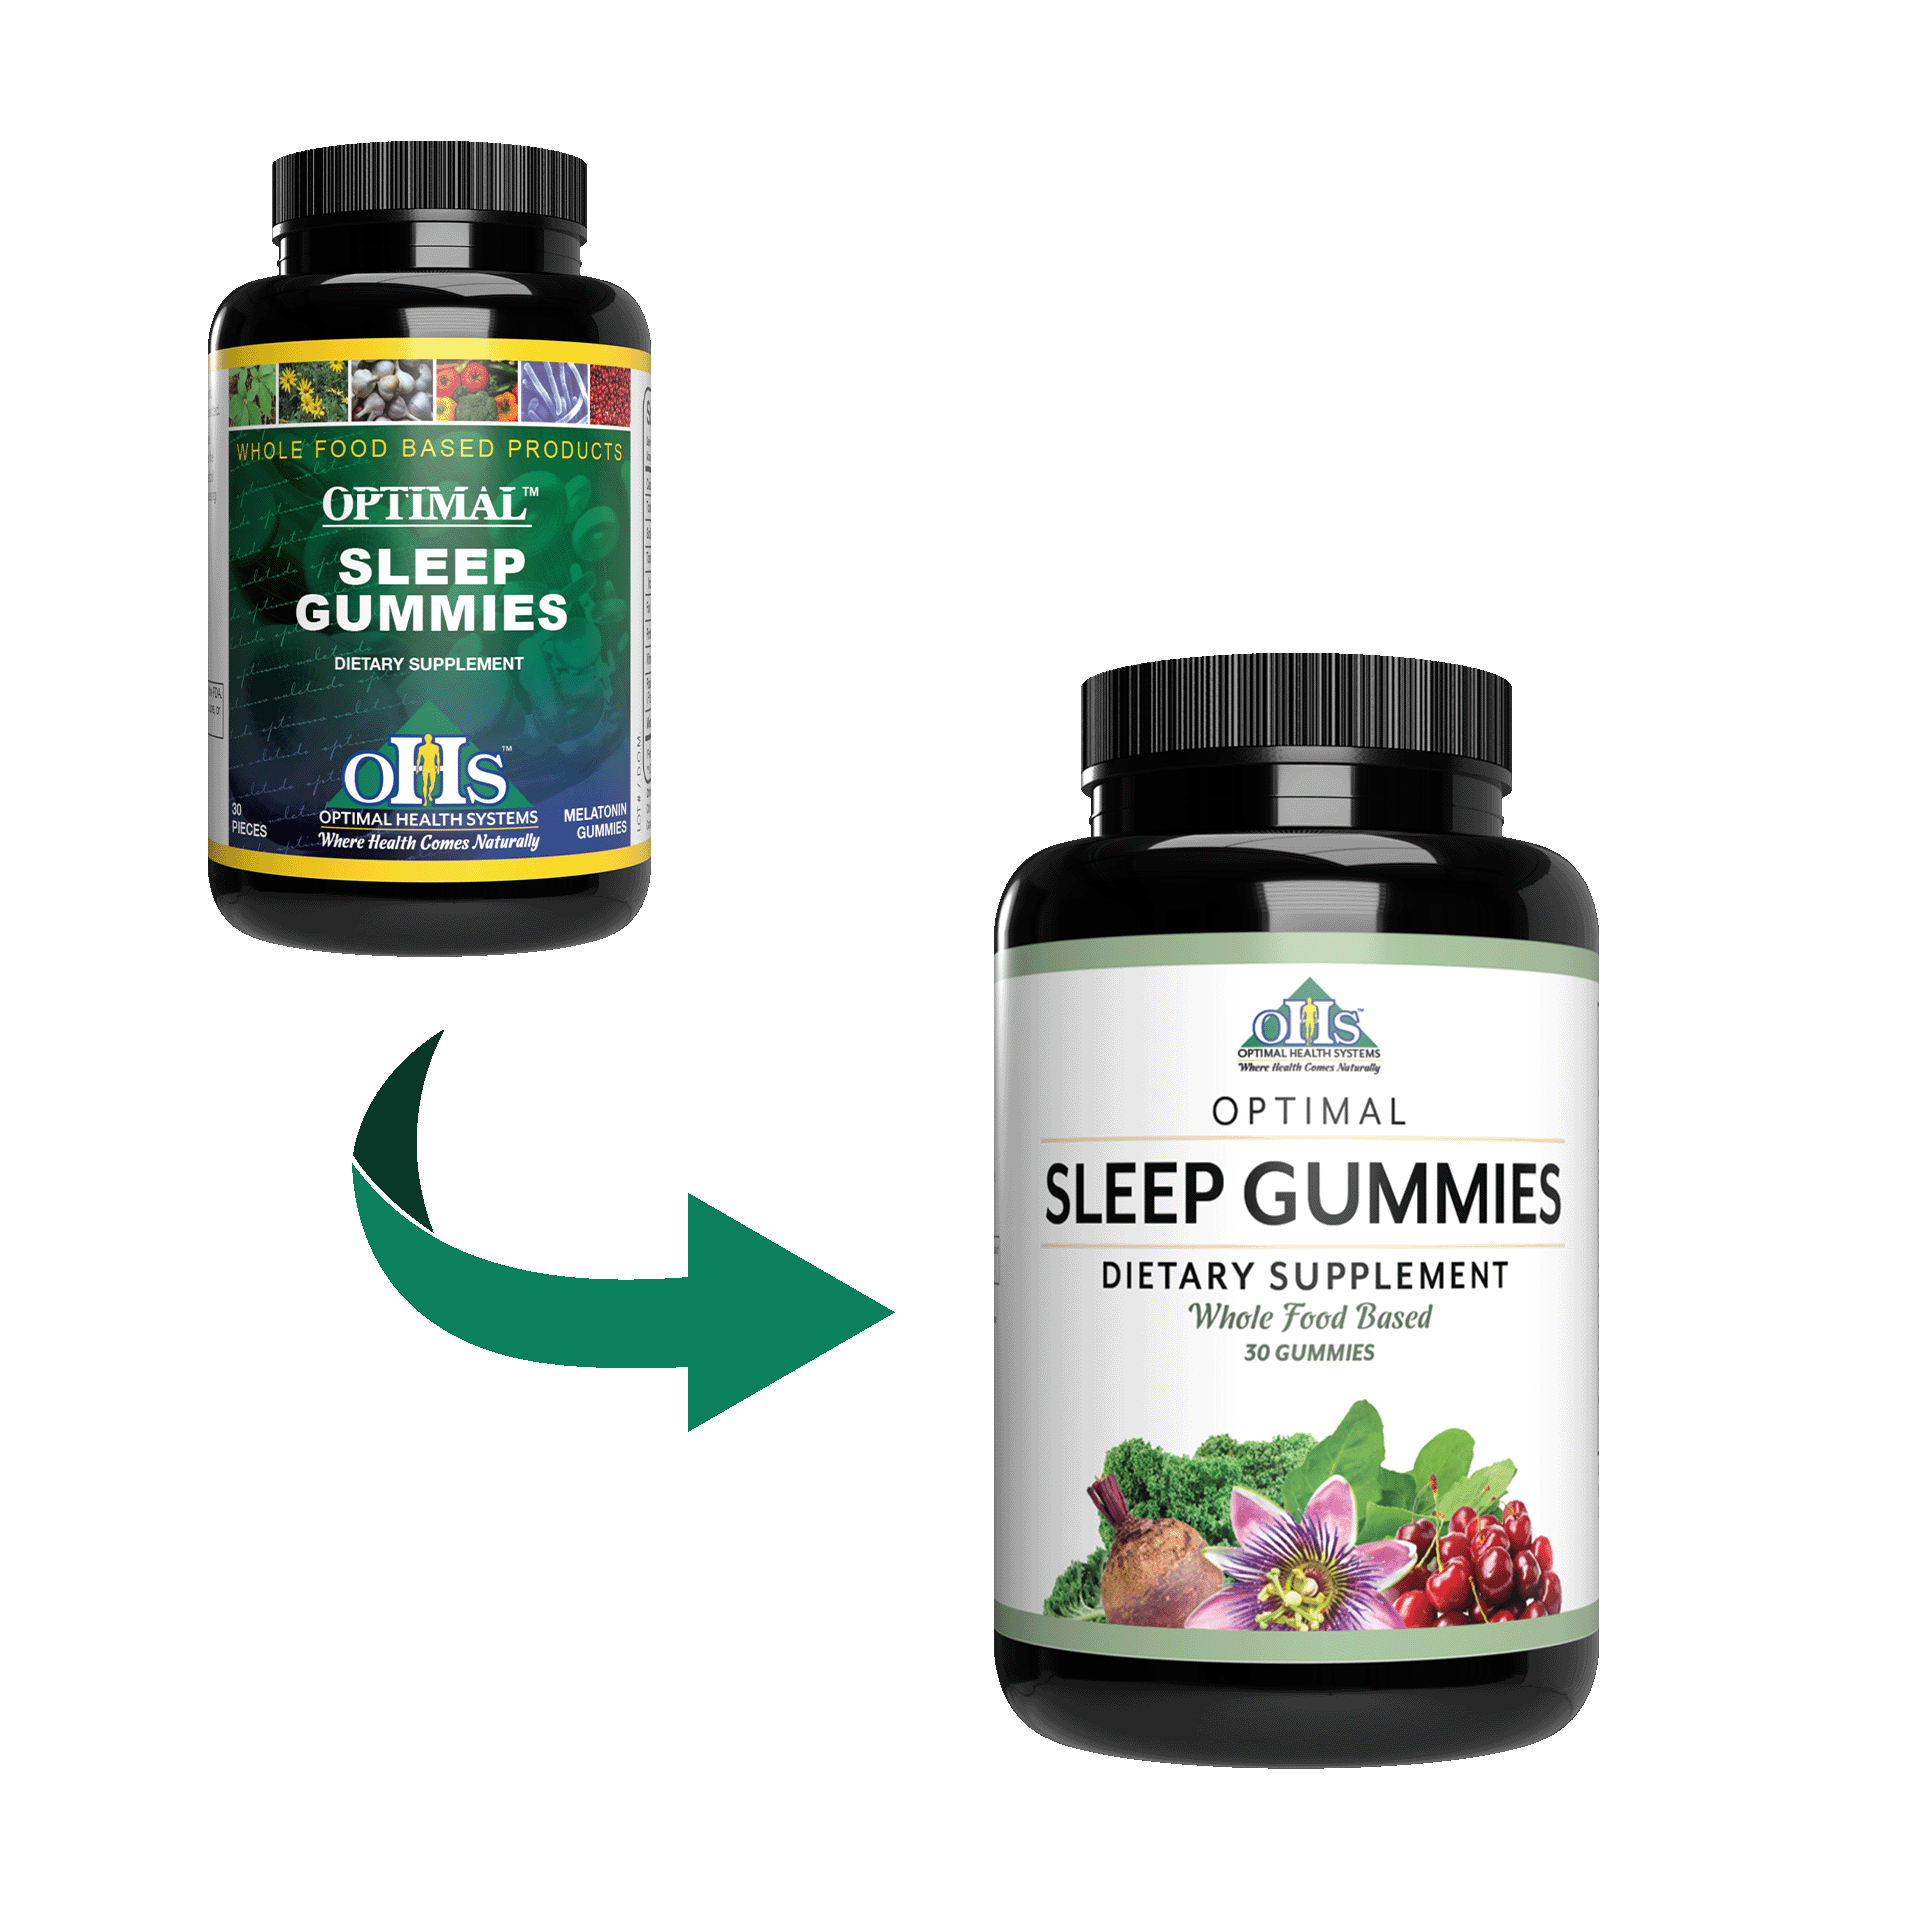 Image of a bottle of Optimal Sleep Gummies with a green arrow pointing to its new label design.